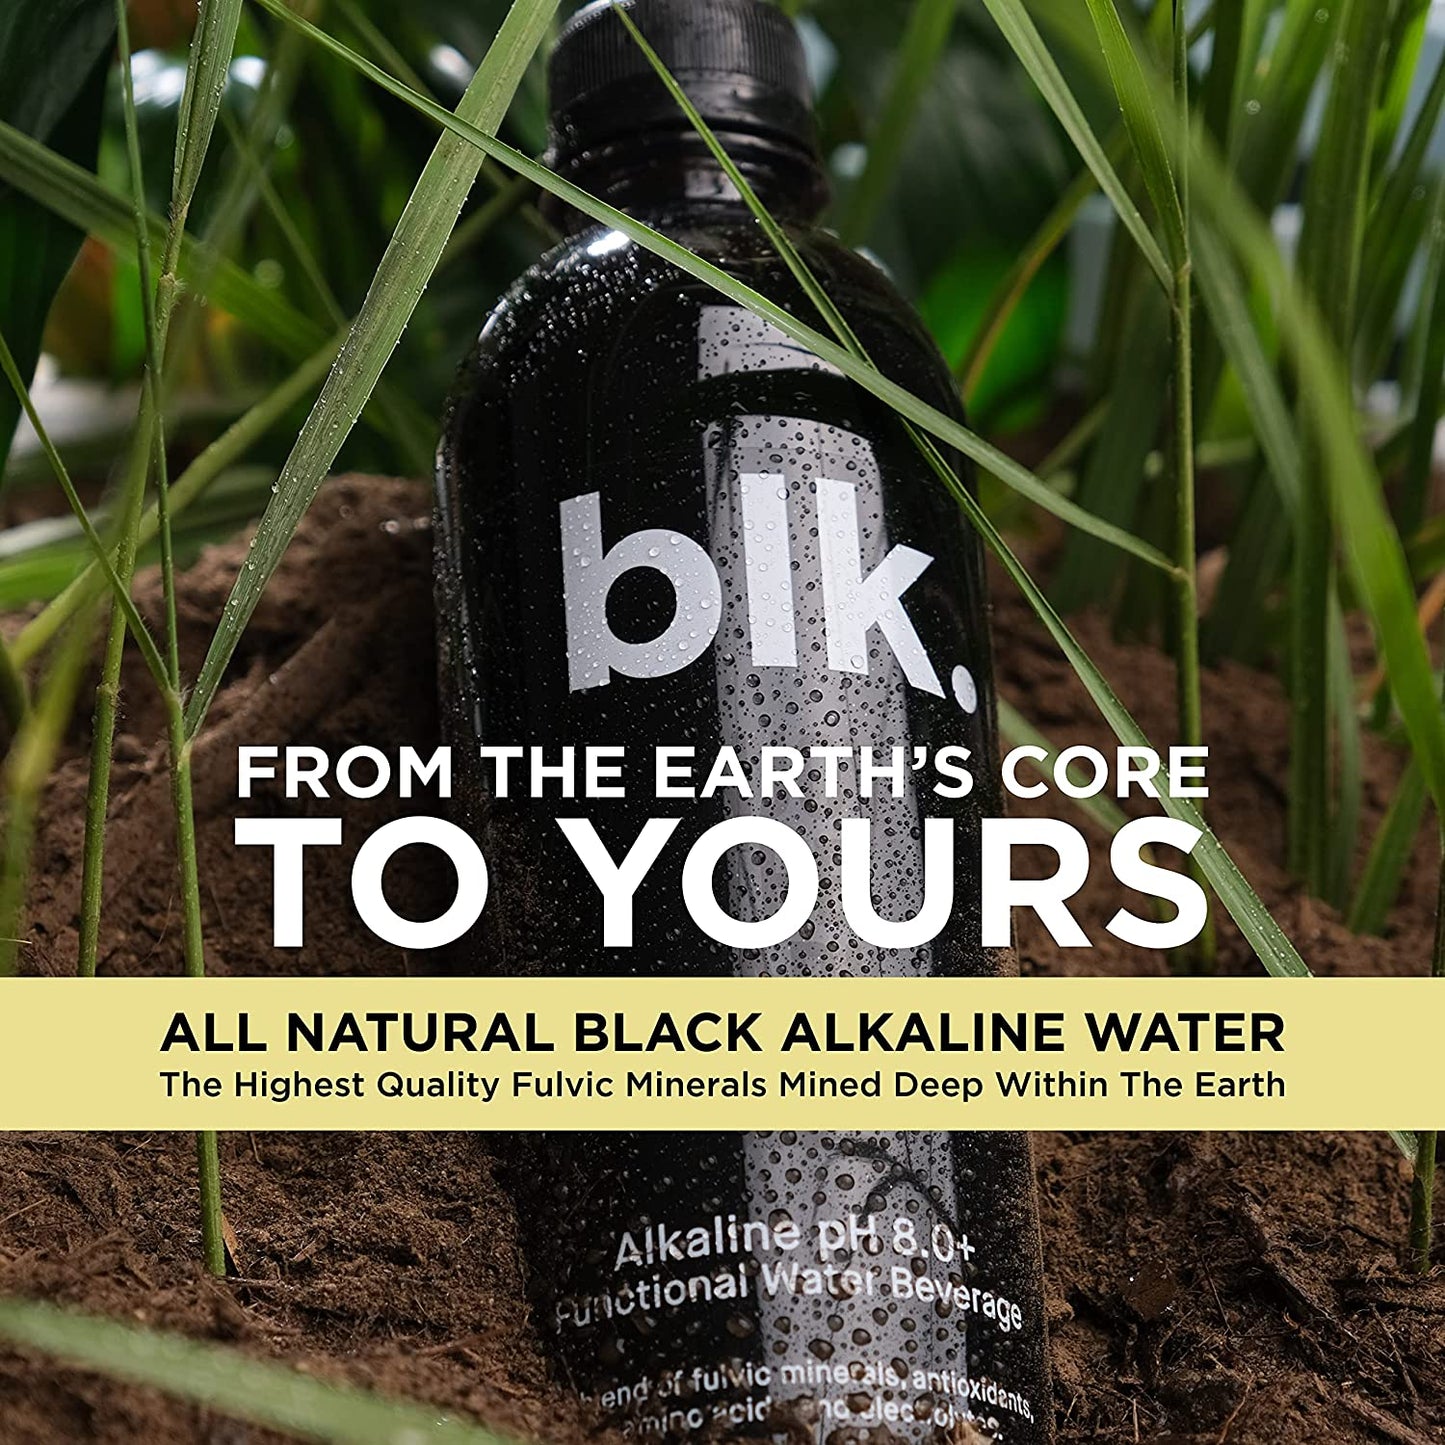 blk water from the earth's core to yours - all natural black alkaline water - the highest quality fulvic minerals mined deep within the earth